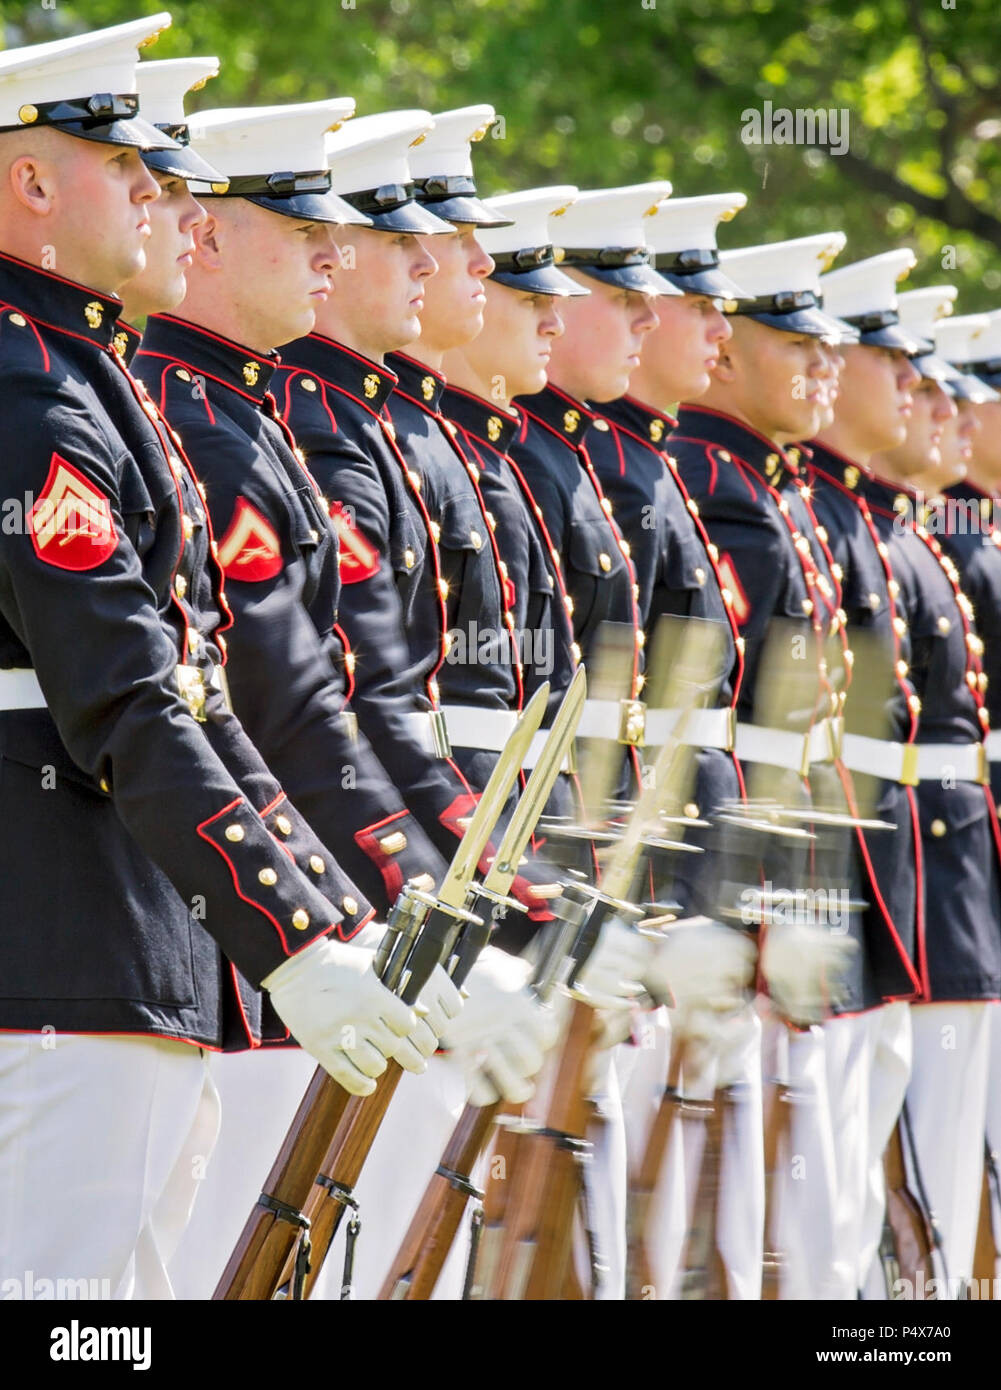 The U.S. Marine Corps Silent Drill Platoon performs during the Centennial Celebration Ceremony at Lejeune Field, Marine Corps Base (MCB) Quantico, Va., May 10, 2017. The event commemorates the founding of MCB Quantico in 1917, and consisted of performances by the U.S. Marine Corps Silent Drill Platoon and the U.S. Marine Drum & Bugle Corps. Stock Photo